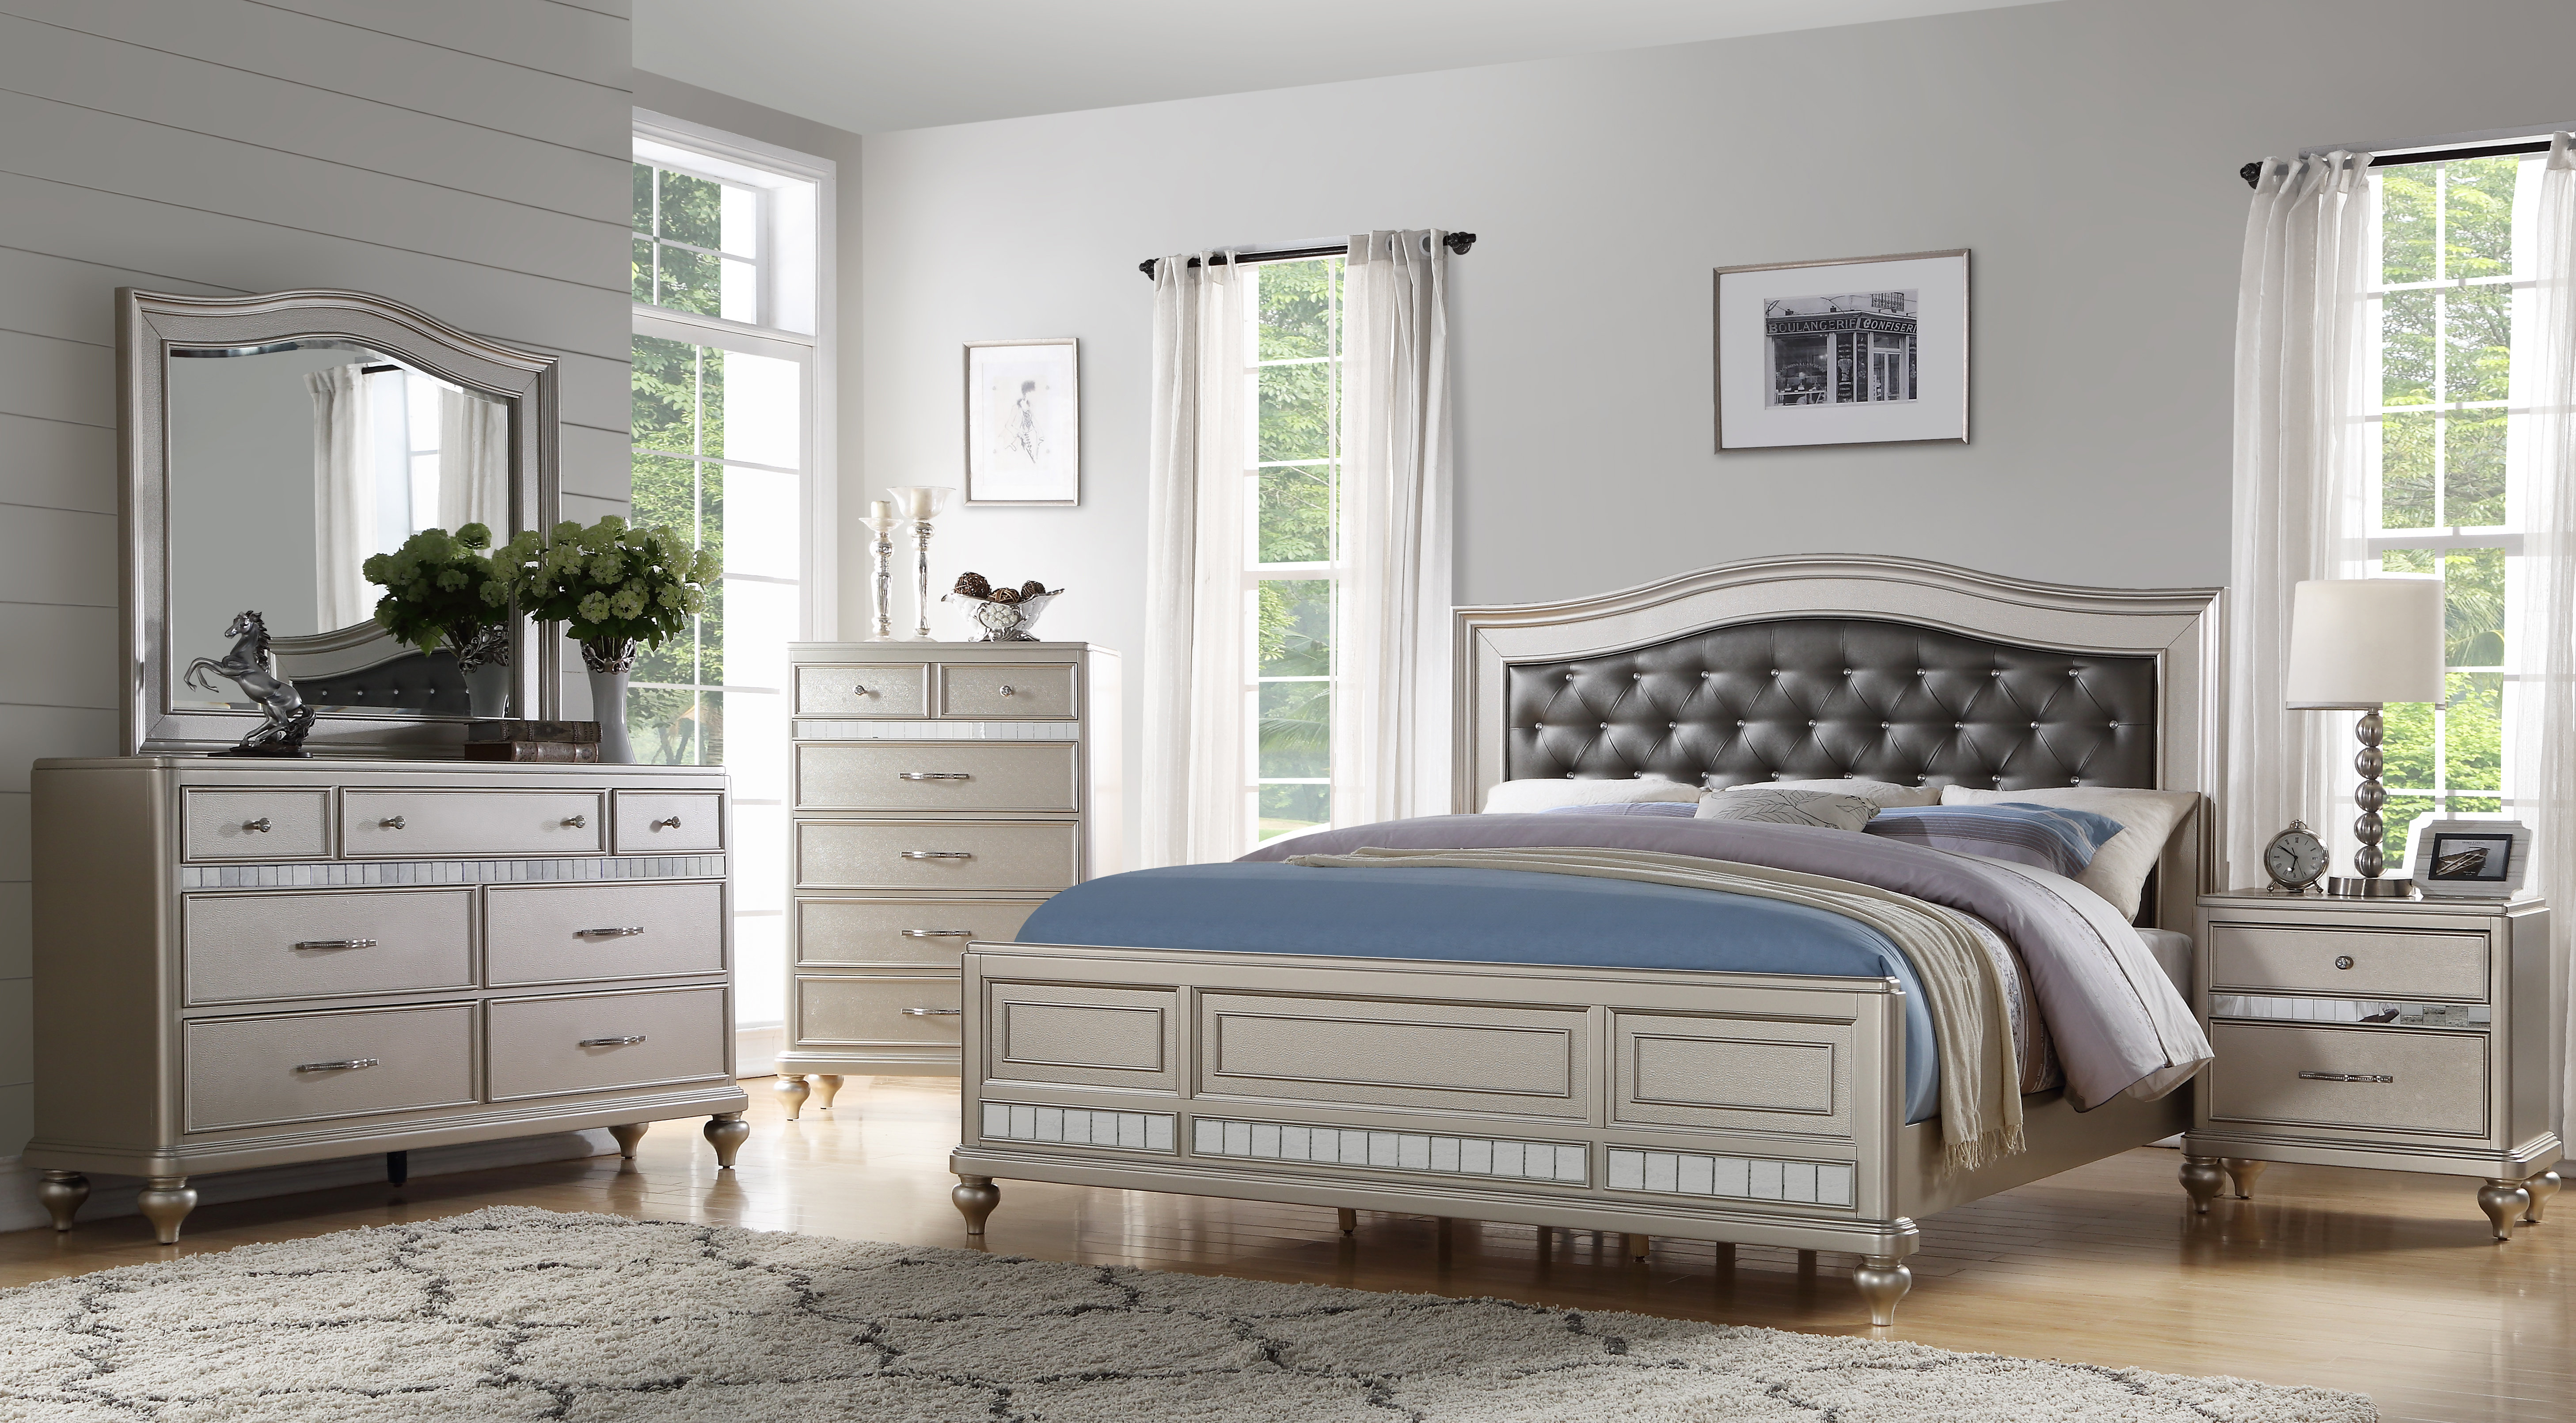 Keytesville 4 Piece Bedroom Set with dimensions 5830 X 3220